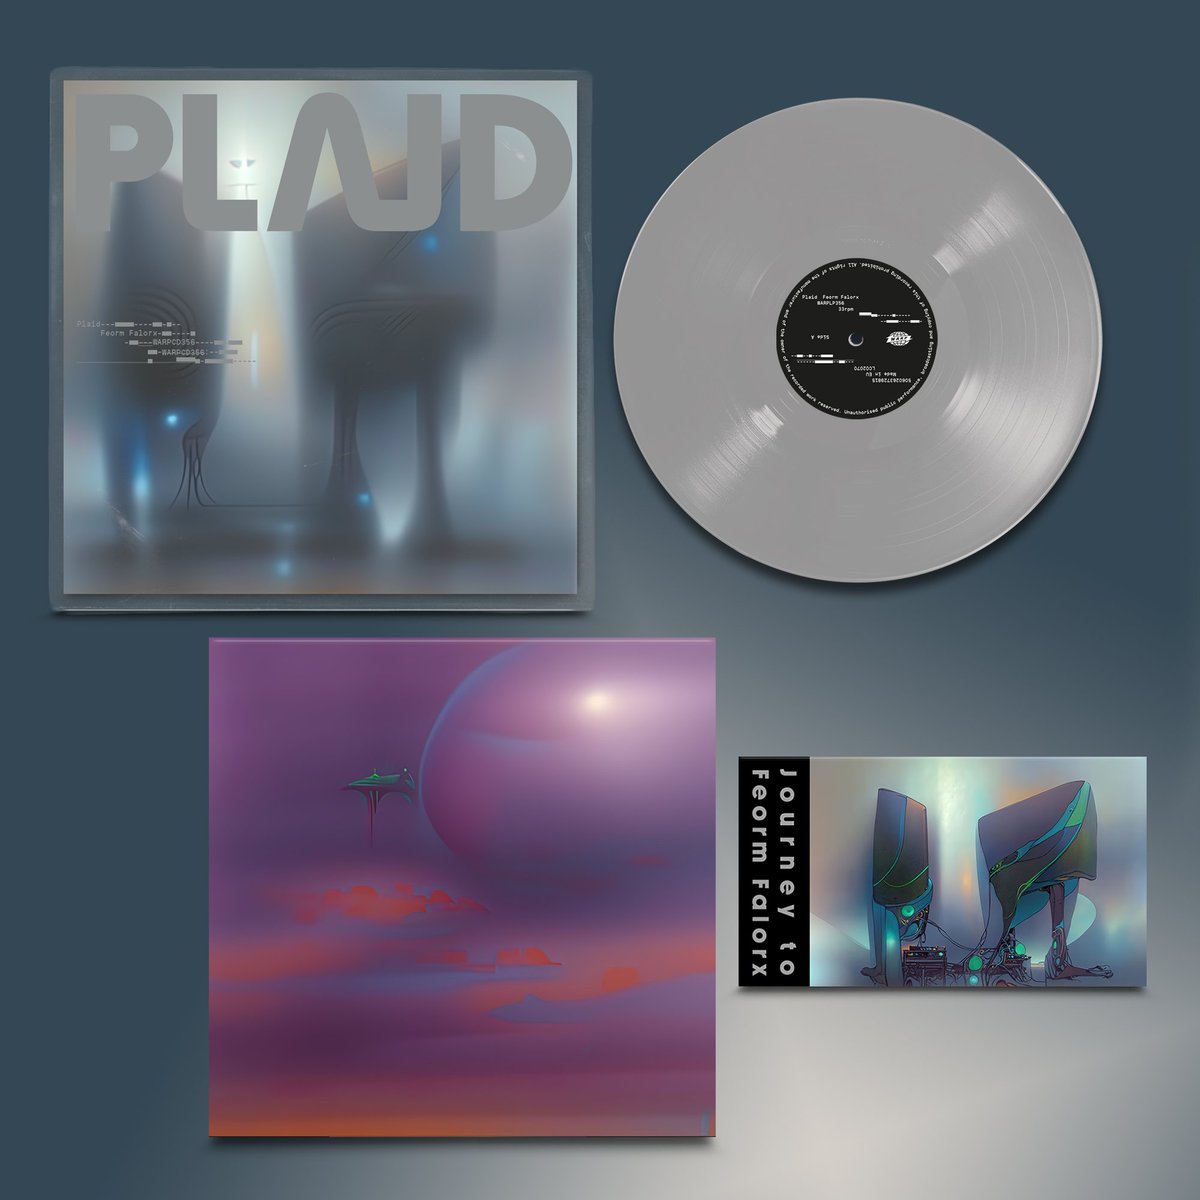 Pre-order @plaidmusic ‘Feorm Falorx’ from @bleep, shipping with a 44-page A5 graphic novel → bleep.com/release/329953…